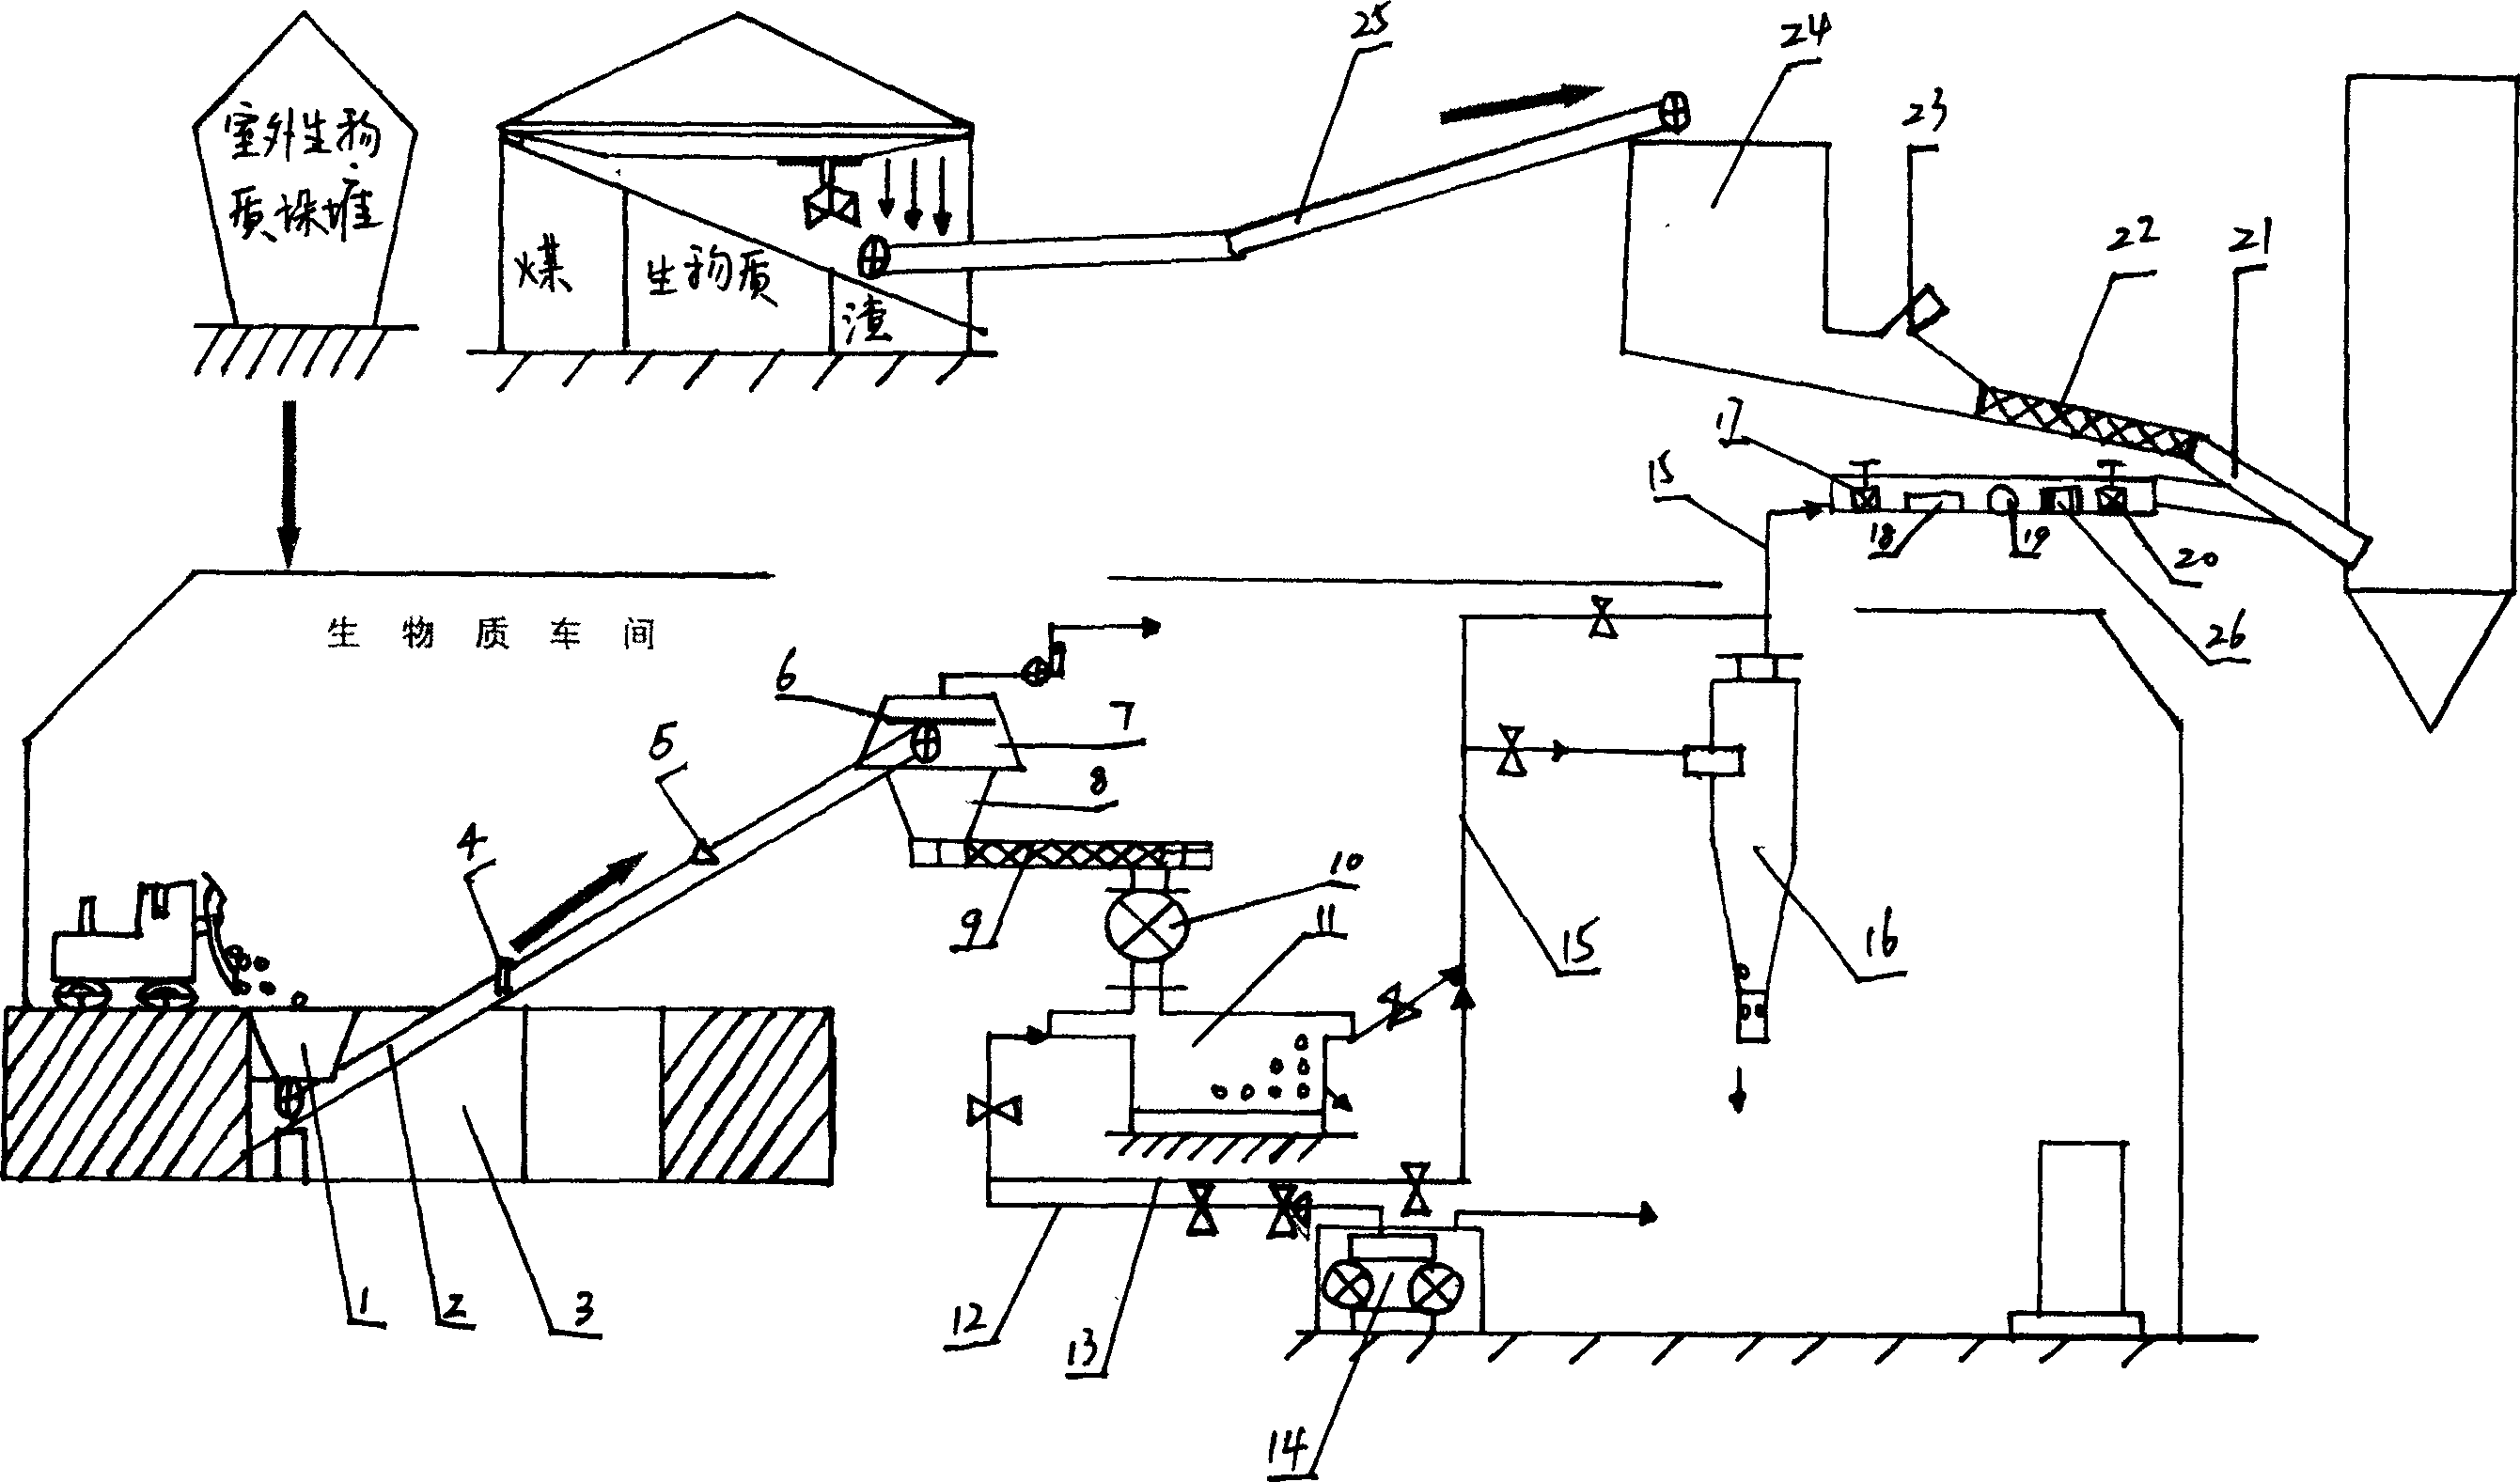 Device and system for feeding large bio-material to furnace for directly burning generating